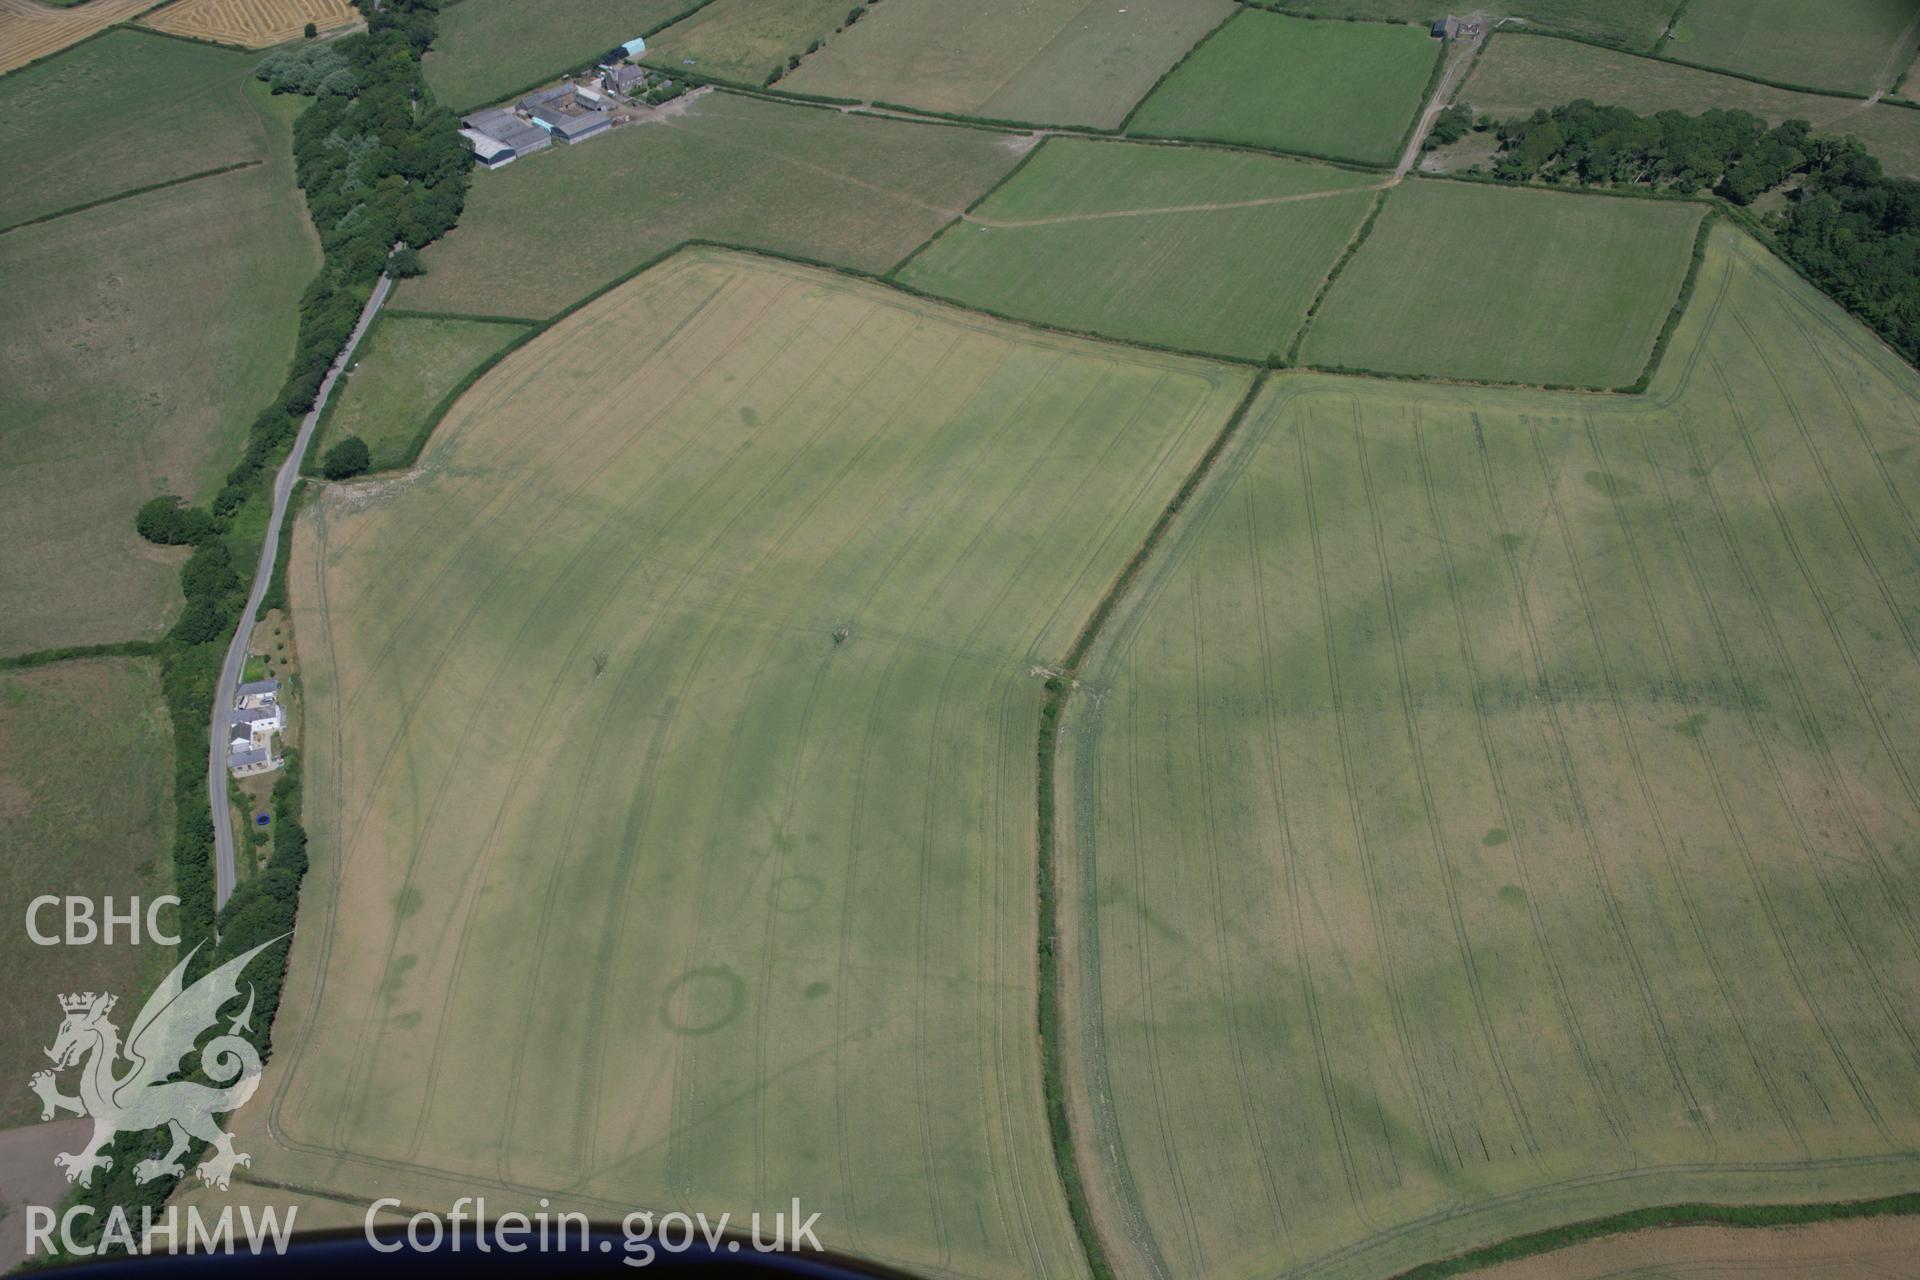 RCAHMW colour oblique aerial photograph of St Donat's Deserted Village. Taken on 24 July 2006 by Toby Driver.